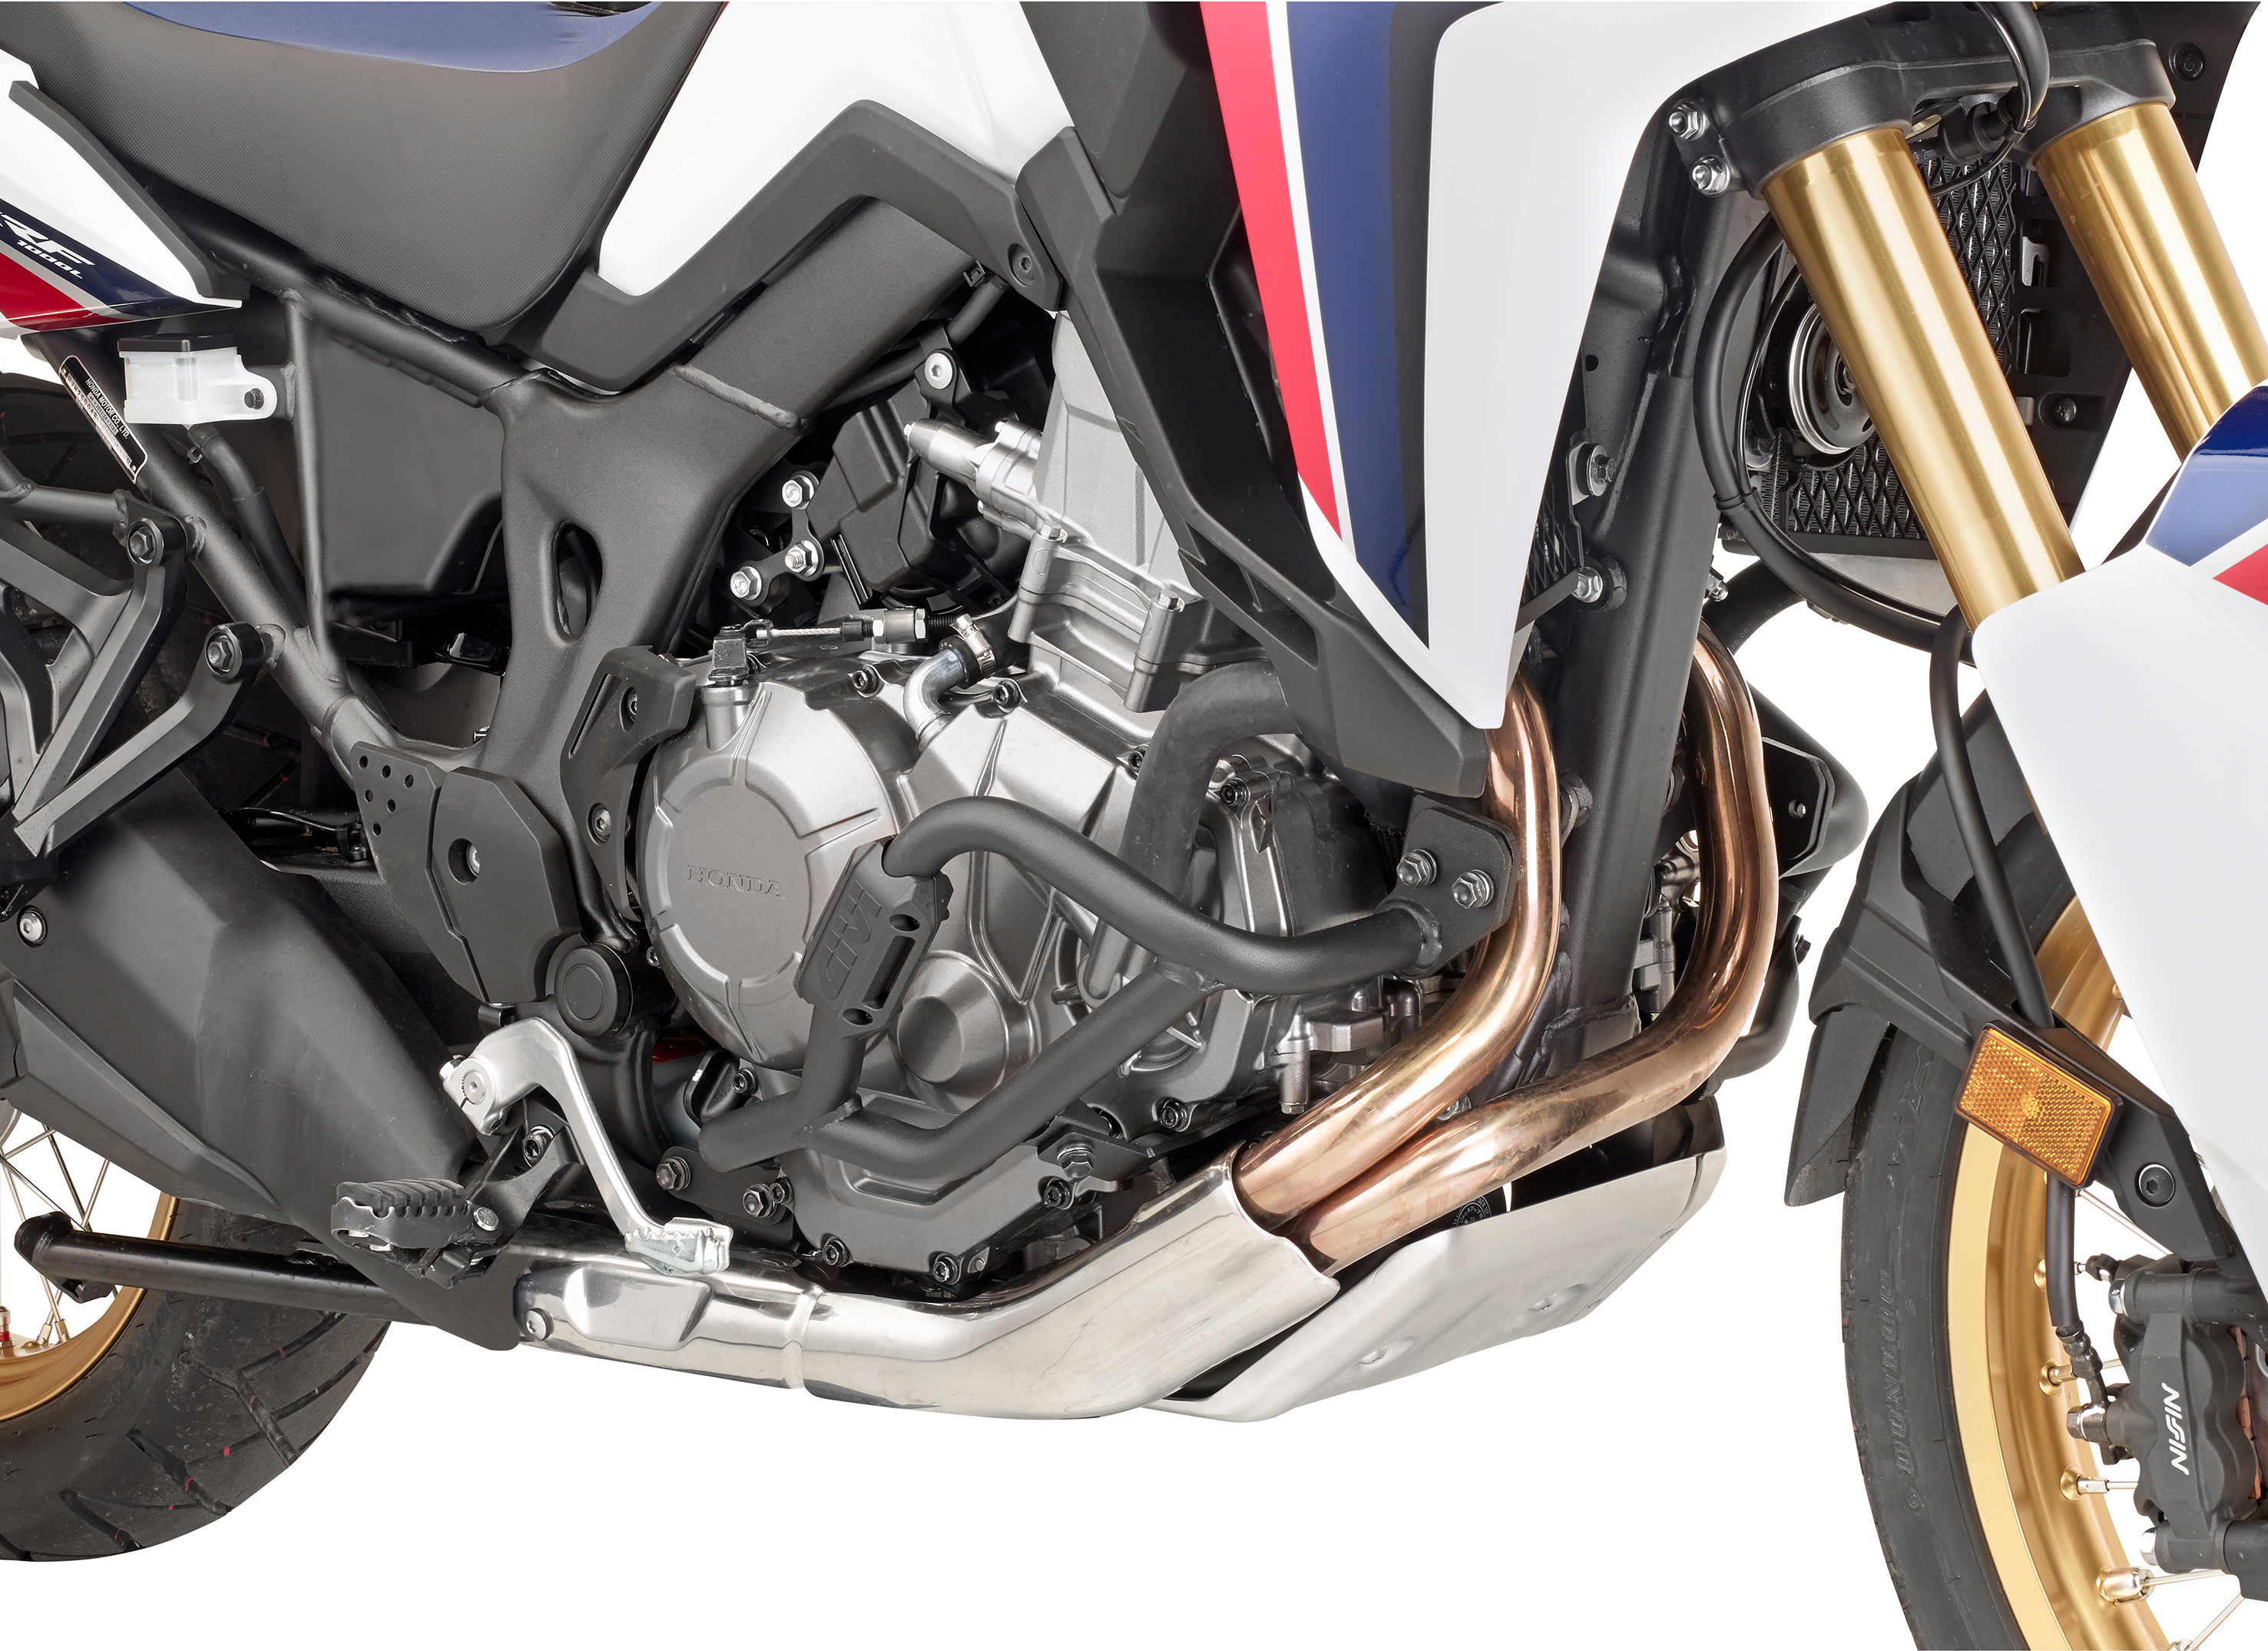 Black Lower Engine Guard - For 16-19 Honda CRF1000L Africa Twin - Click Image to Close